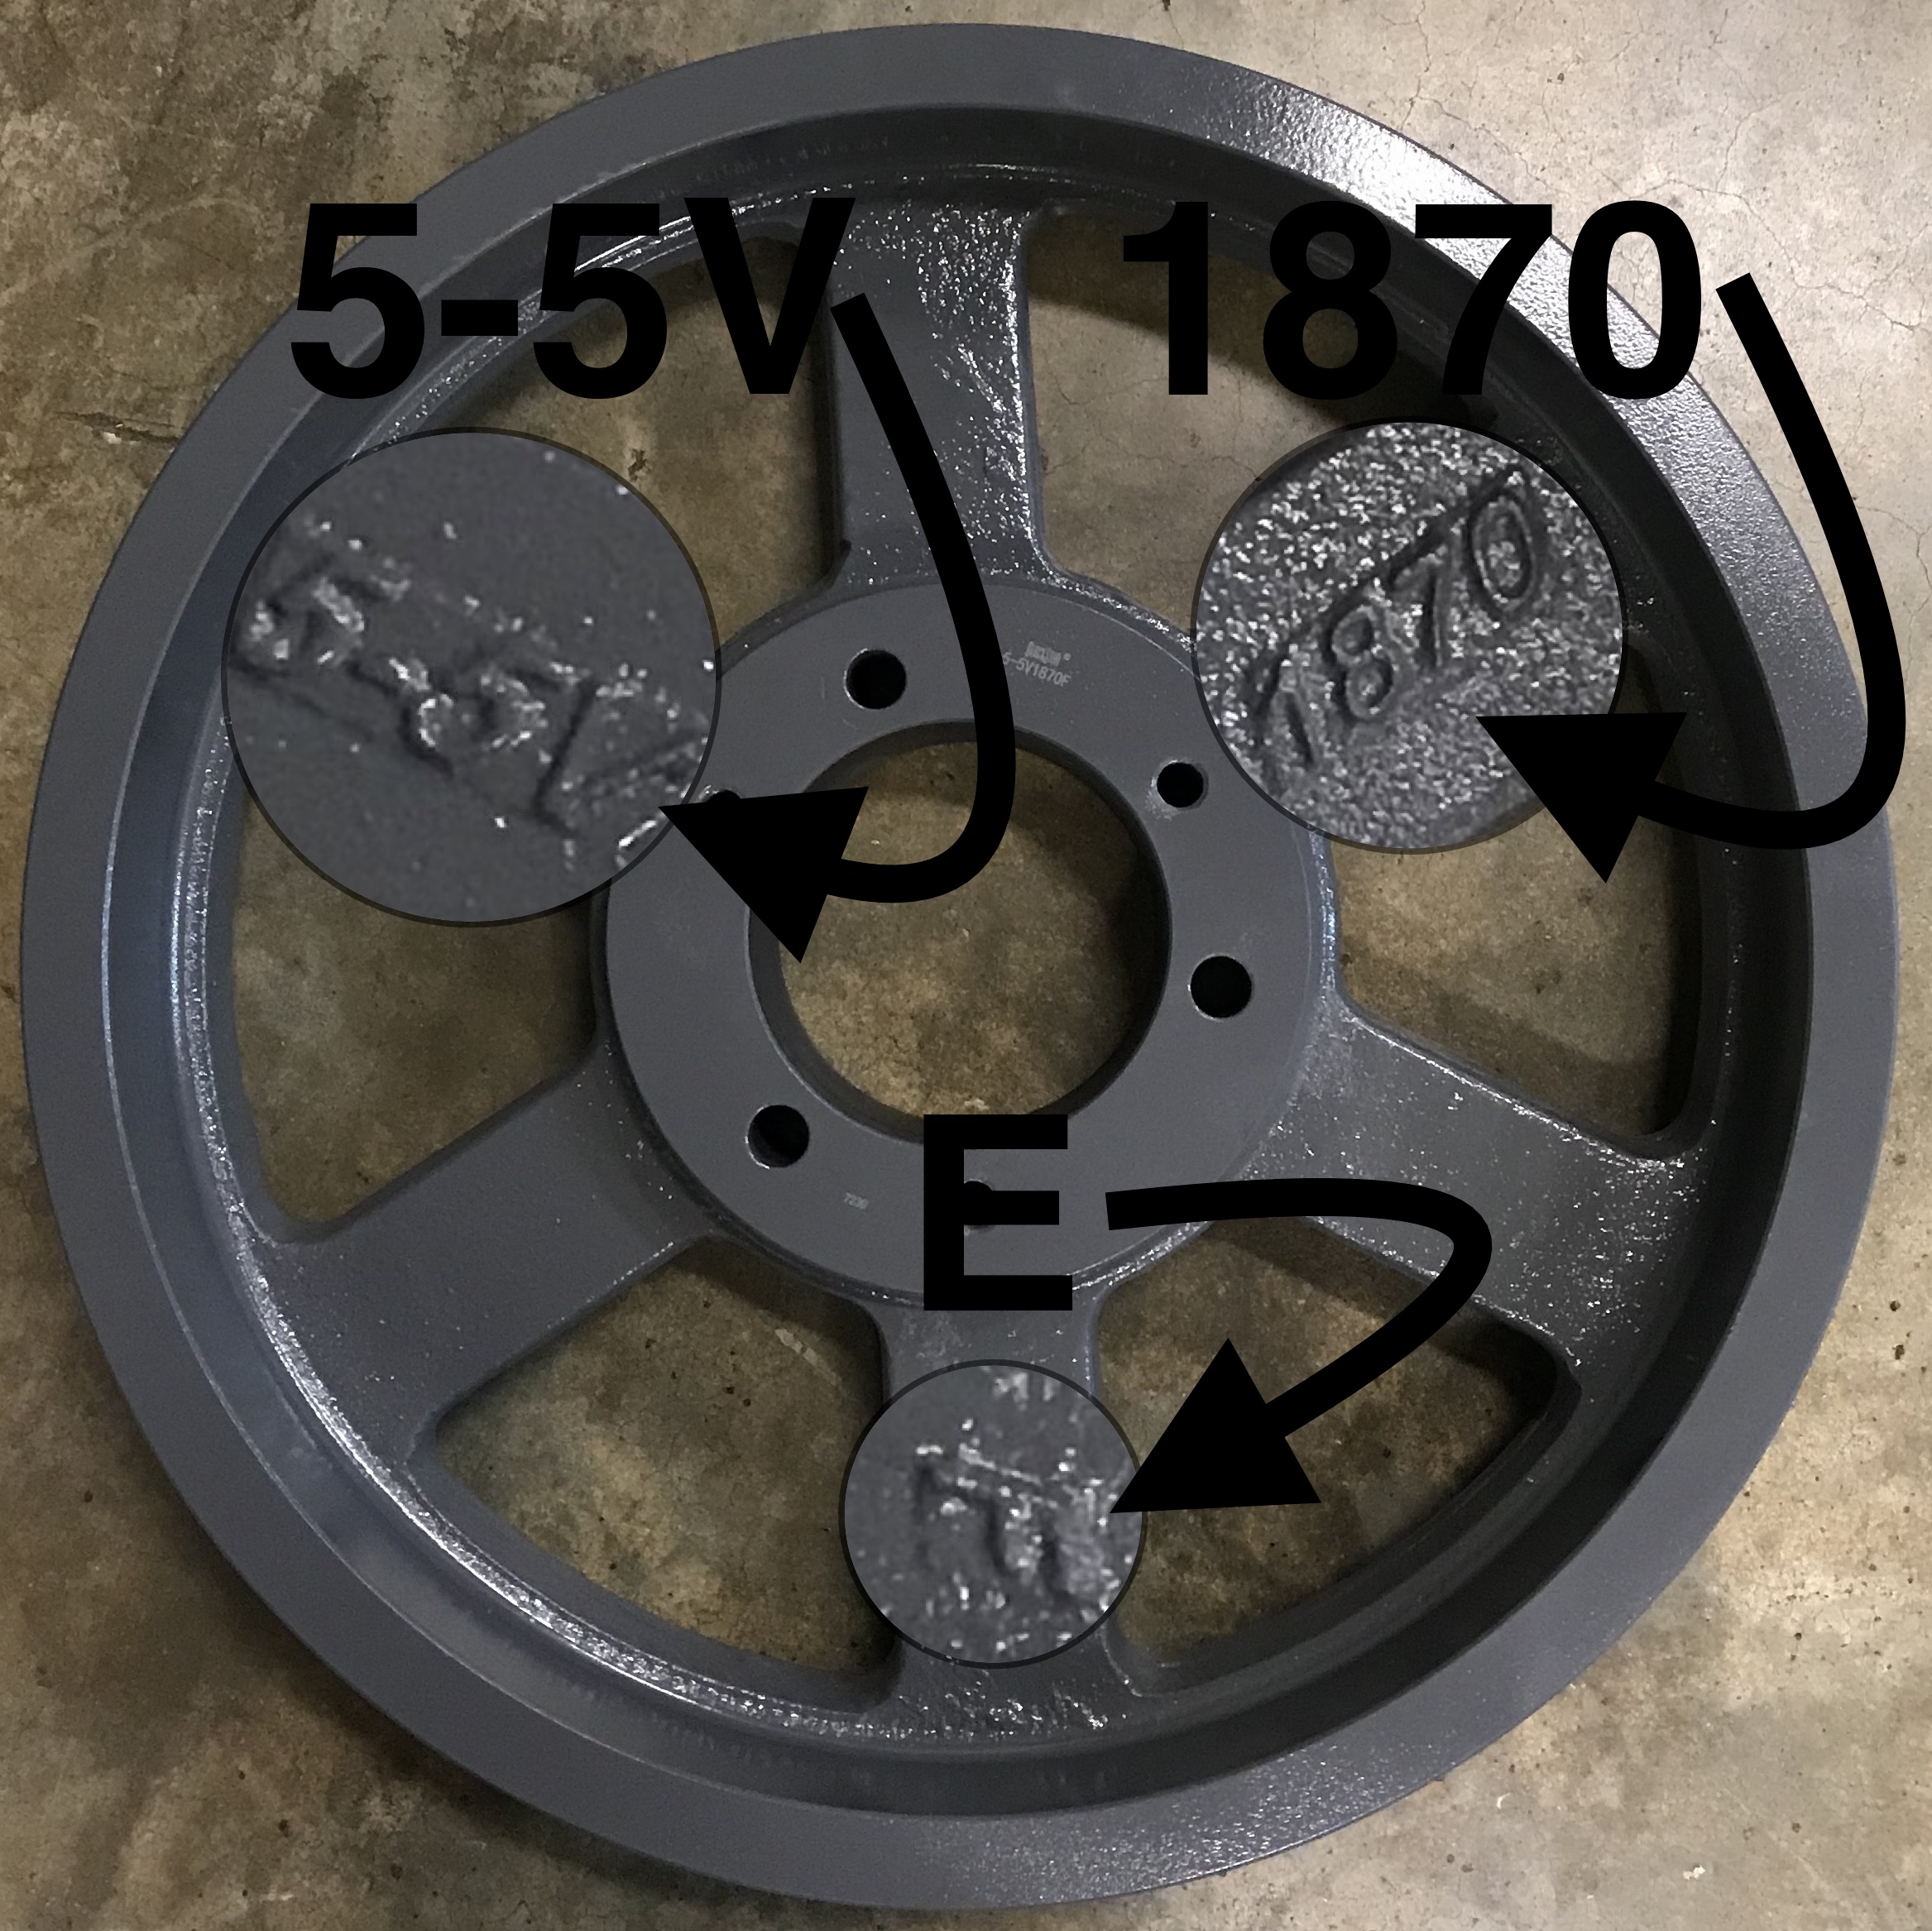 Pulley with different identification characters on different spokes